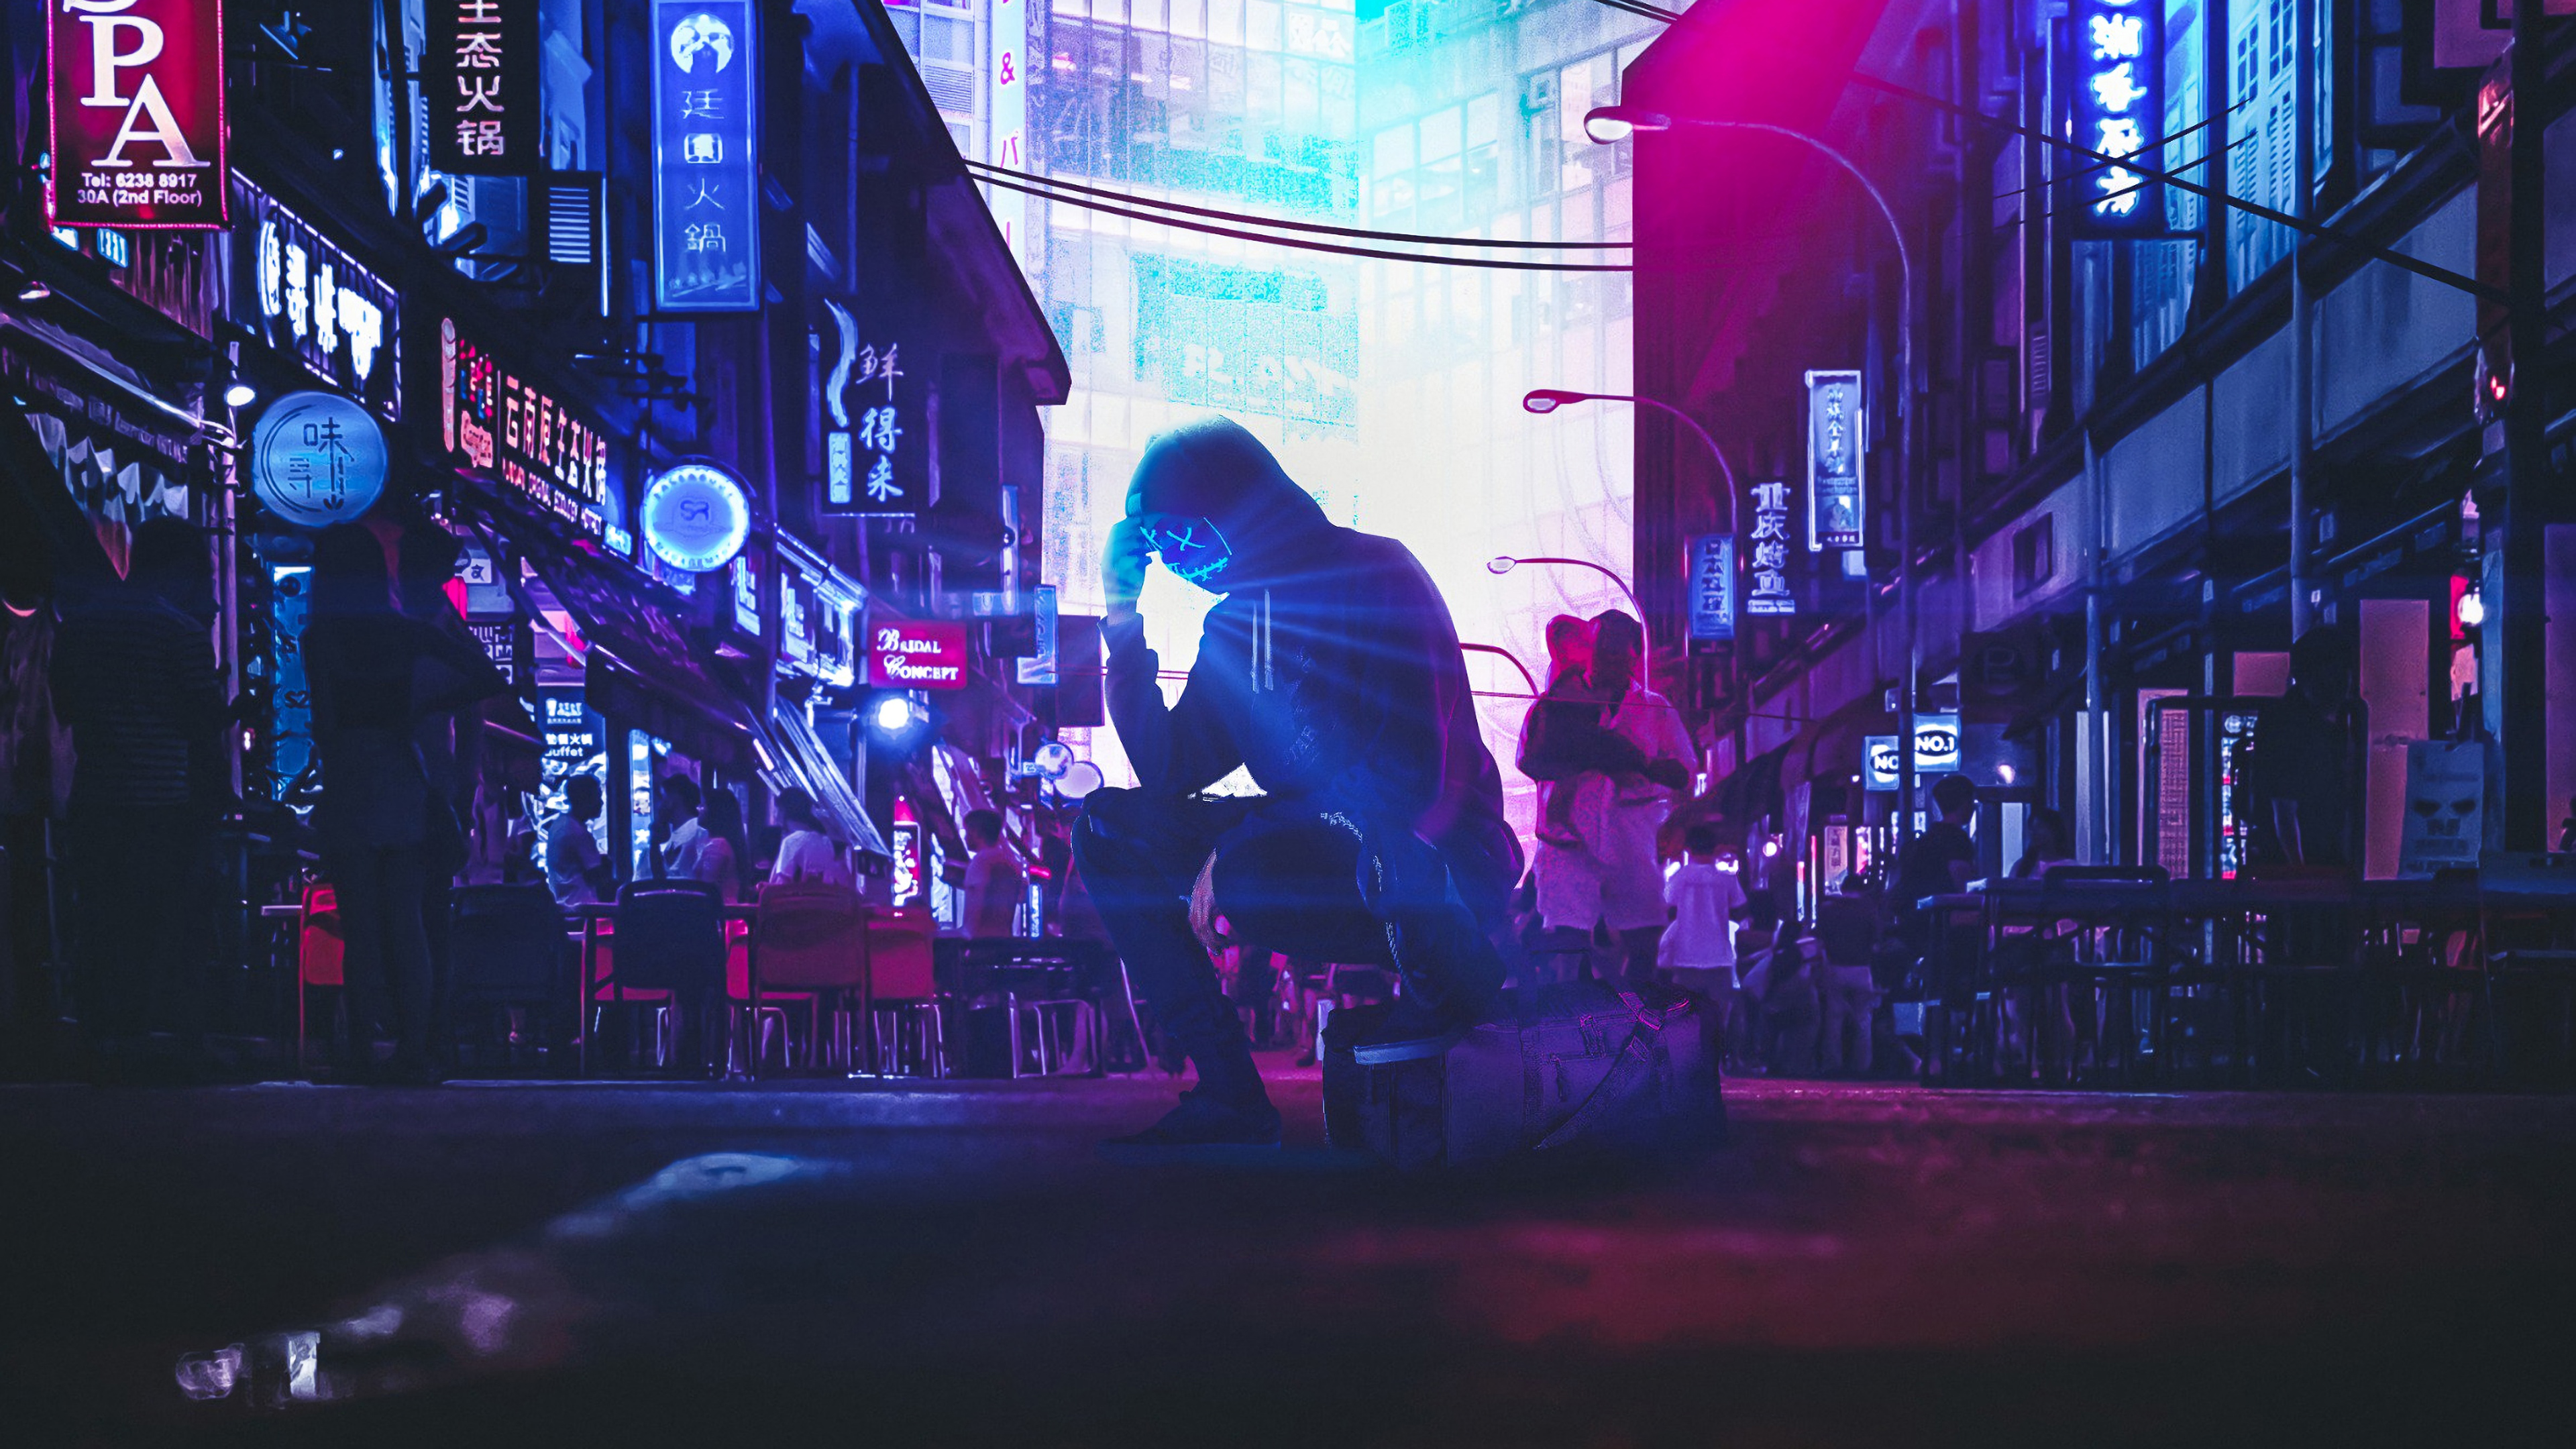 General 3840x2160 digital art artwork photoshopped edit neon lights city cityscape building architecture people street dark glowing purple blue silhouette city lights outdoors photography men hoods mask clothing colorful alone loneliness model